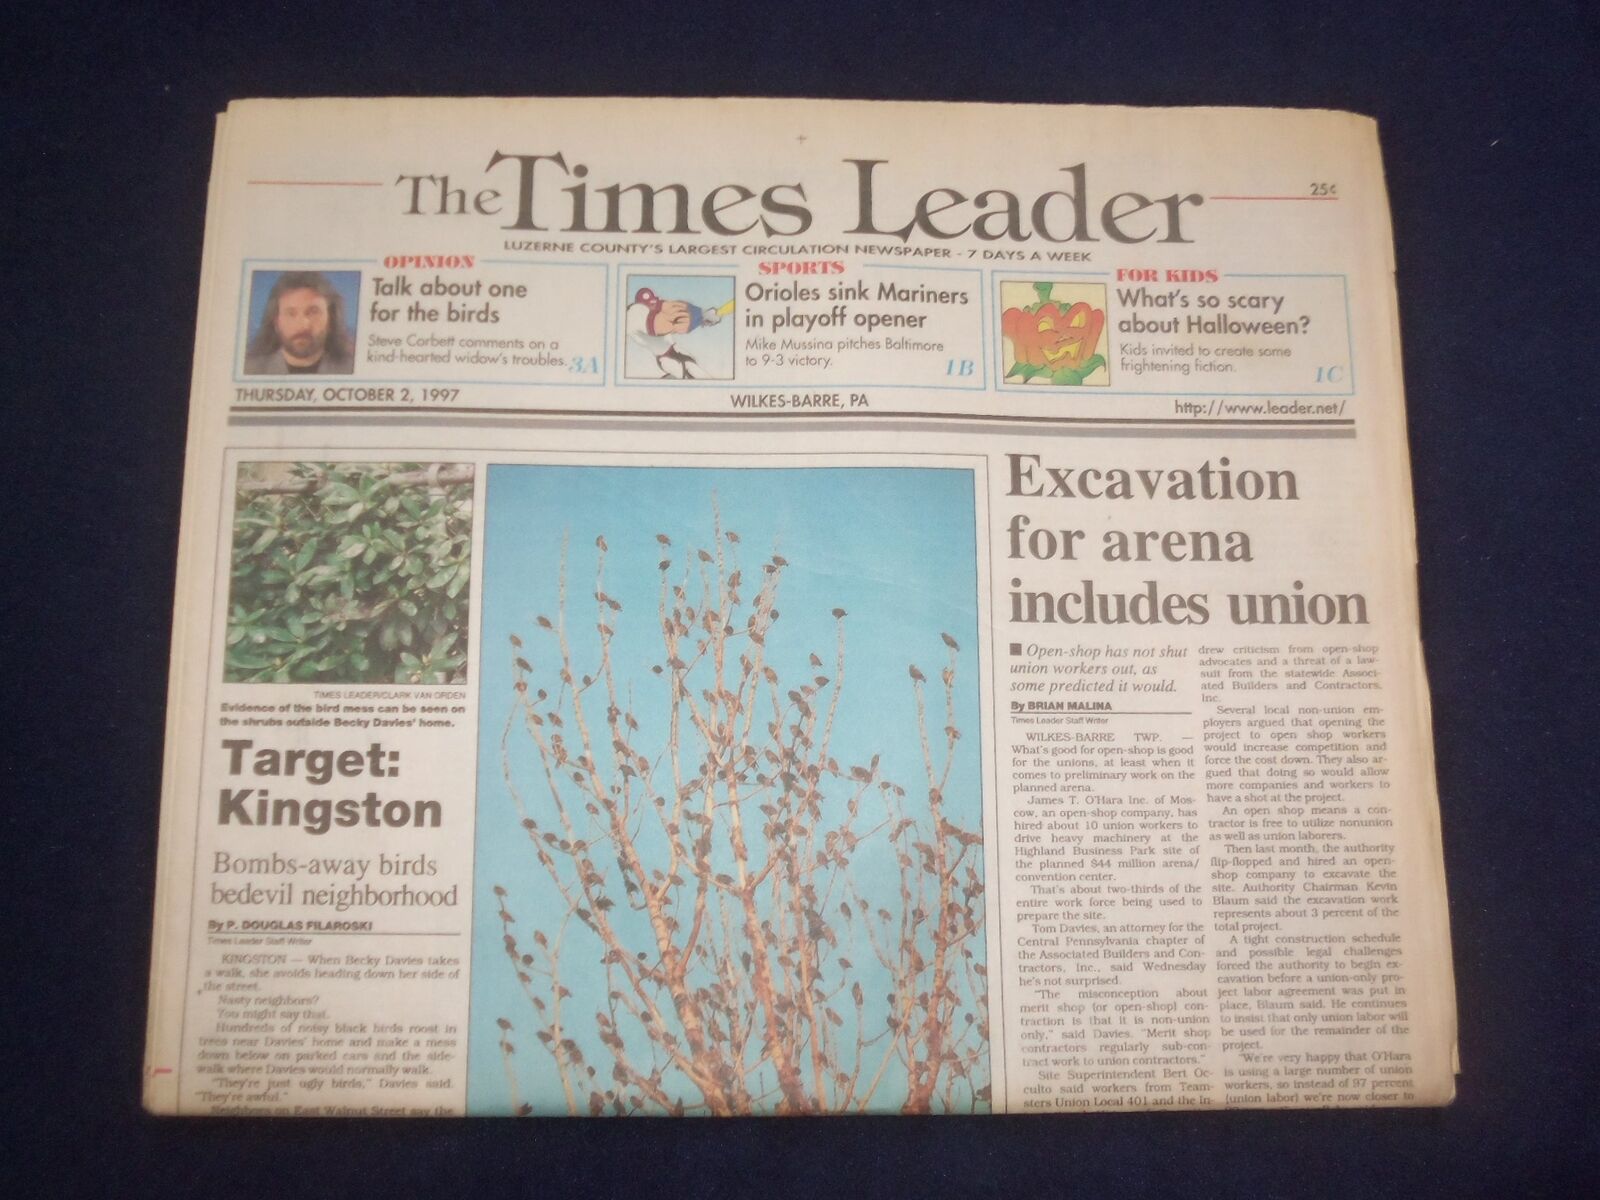 1997 OCT 2 WILKES-BARRE TIMES LEADER -EXCAVATION 4 ARENA INCLUDES UNION- NP 8197